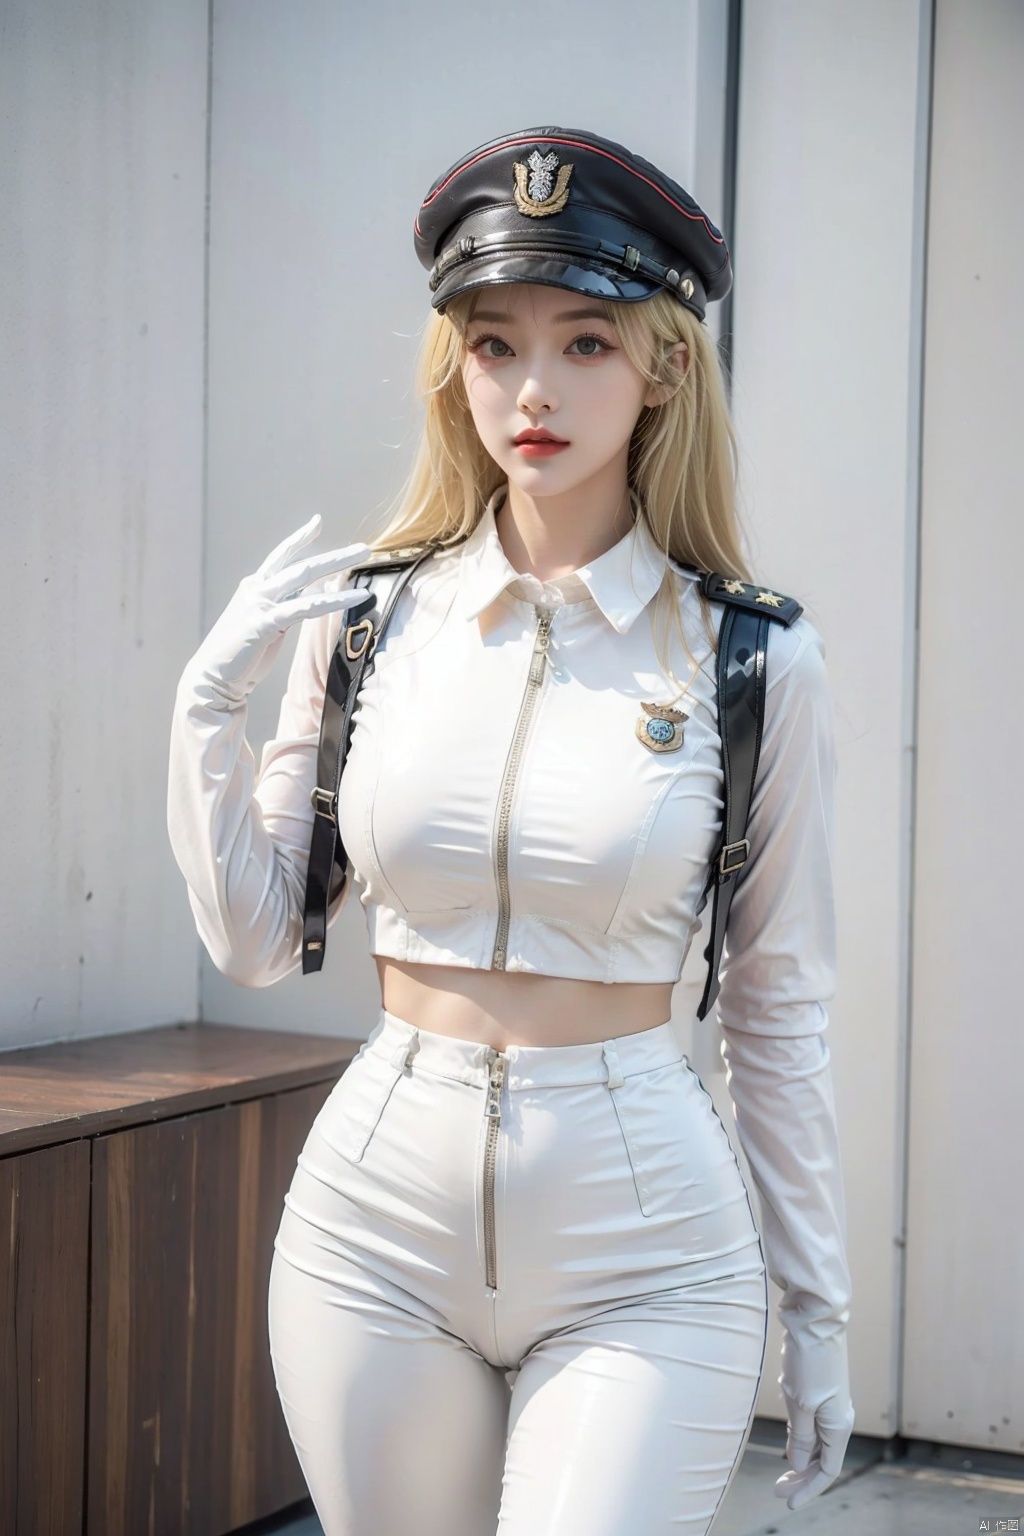  1girl, white tight latex suit,White pants, white room, white geometric objects, abstract art,blonde hair,Military hat, badge, white gloves,1girl